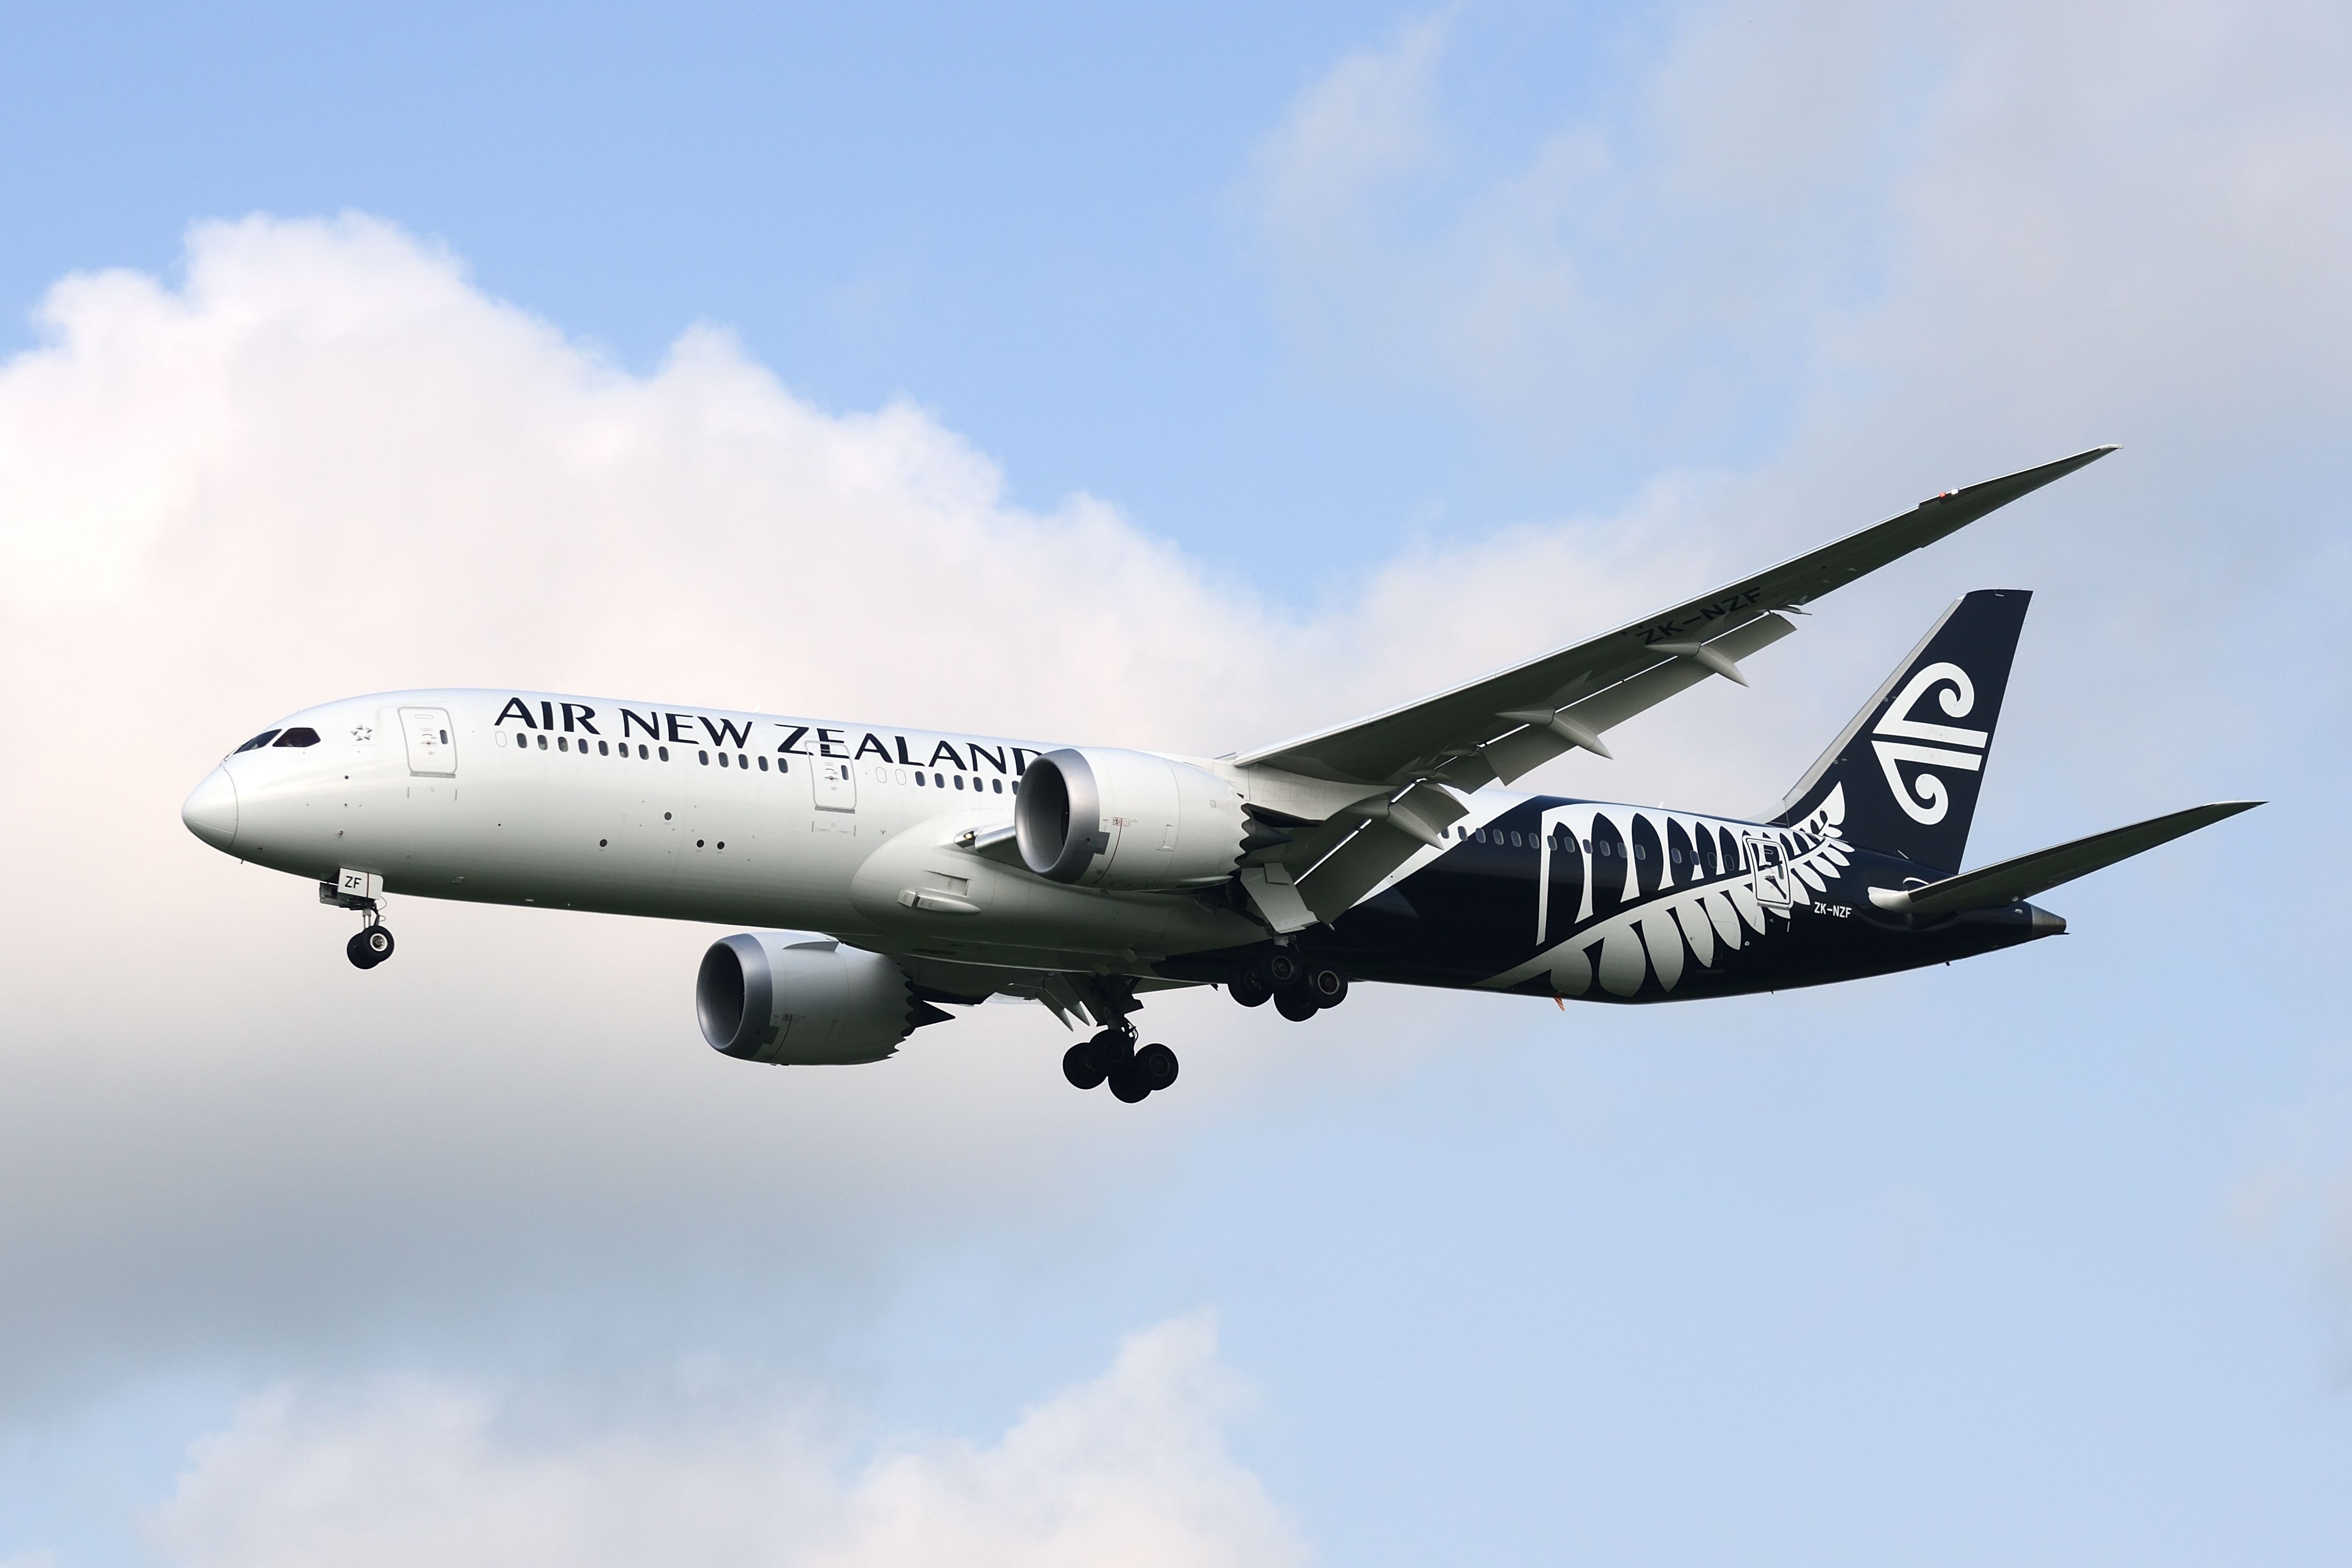 An Air New Zealand Boeing 787-9 Dreamliner flying in the sky.